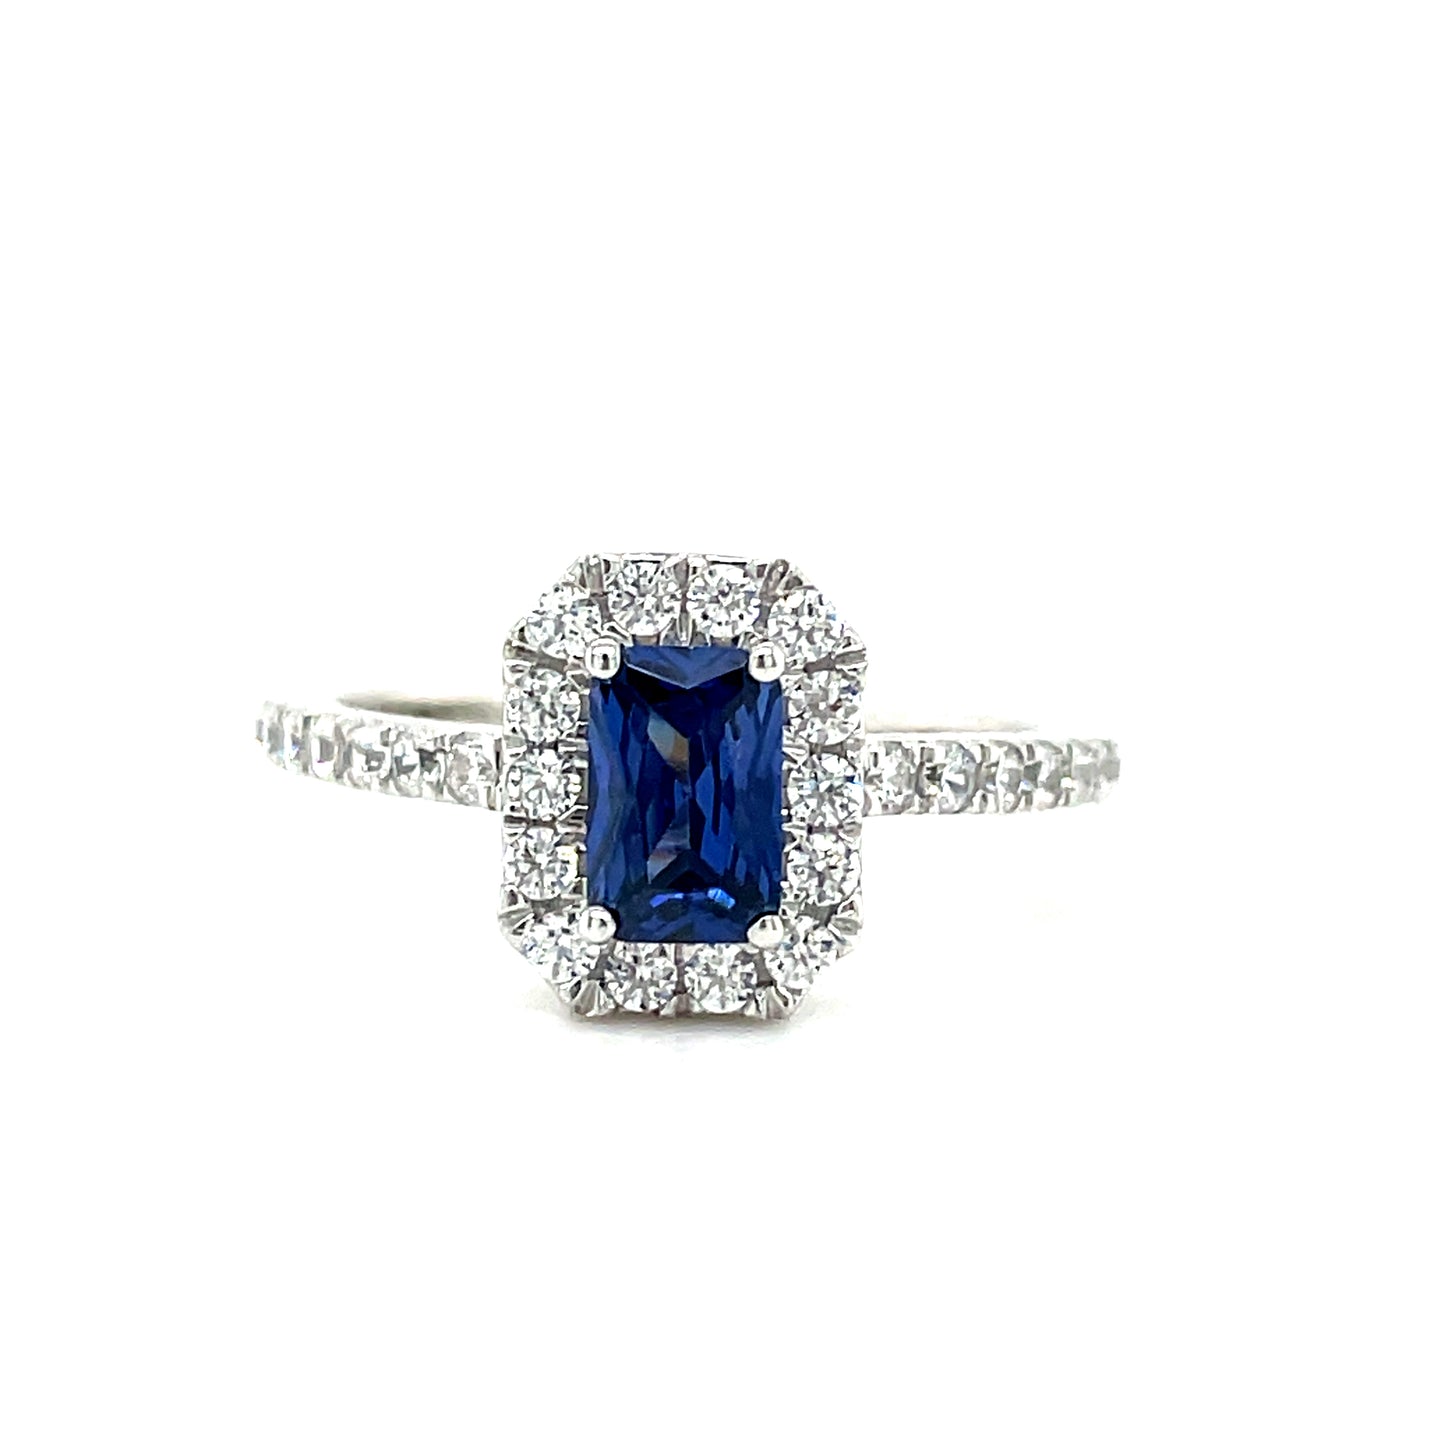 9CT White Gold Emerald Cut Halo Cubic Zirconia and Blue Stone Dress Ring with Stone Set Shoulders